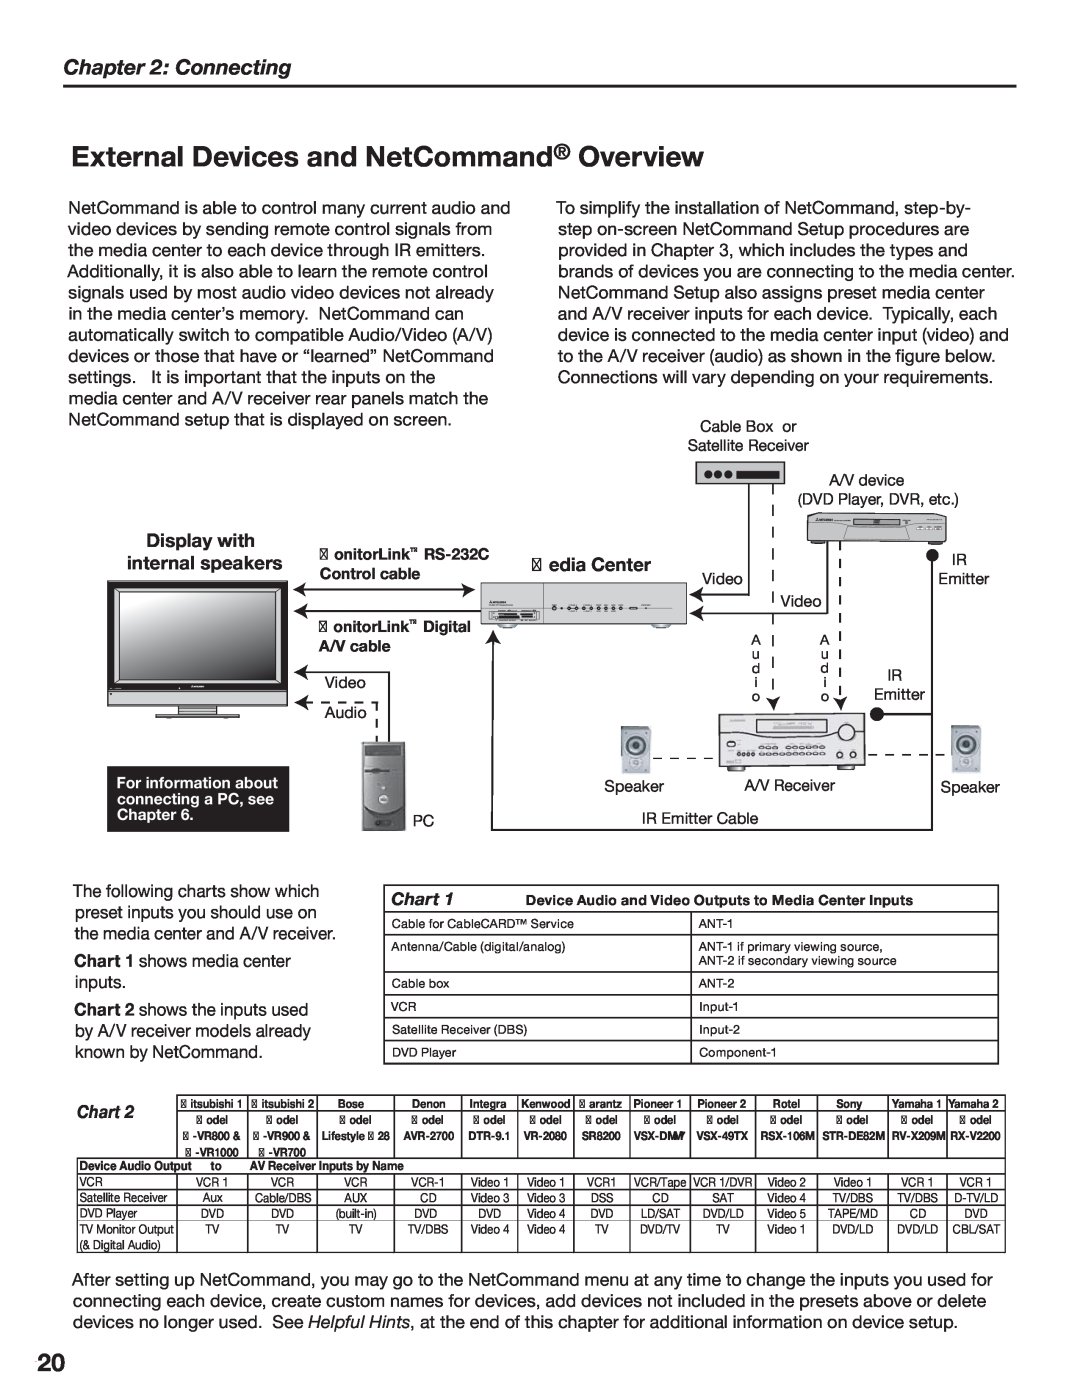 Mitsubishi Electronics LT-3280, LT-3780 manual External Devices and NetCommand Overview, Connecting, Fejb$Foufs, $Ibsu  